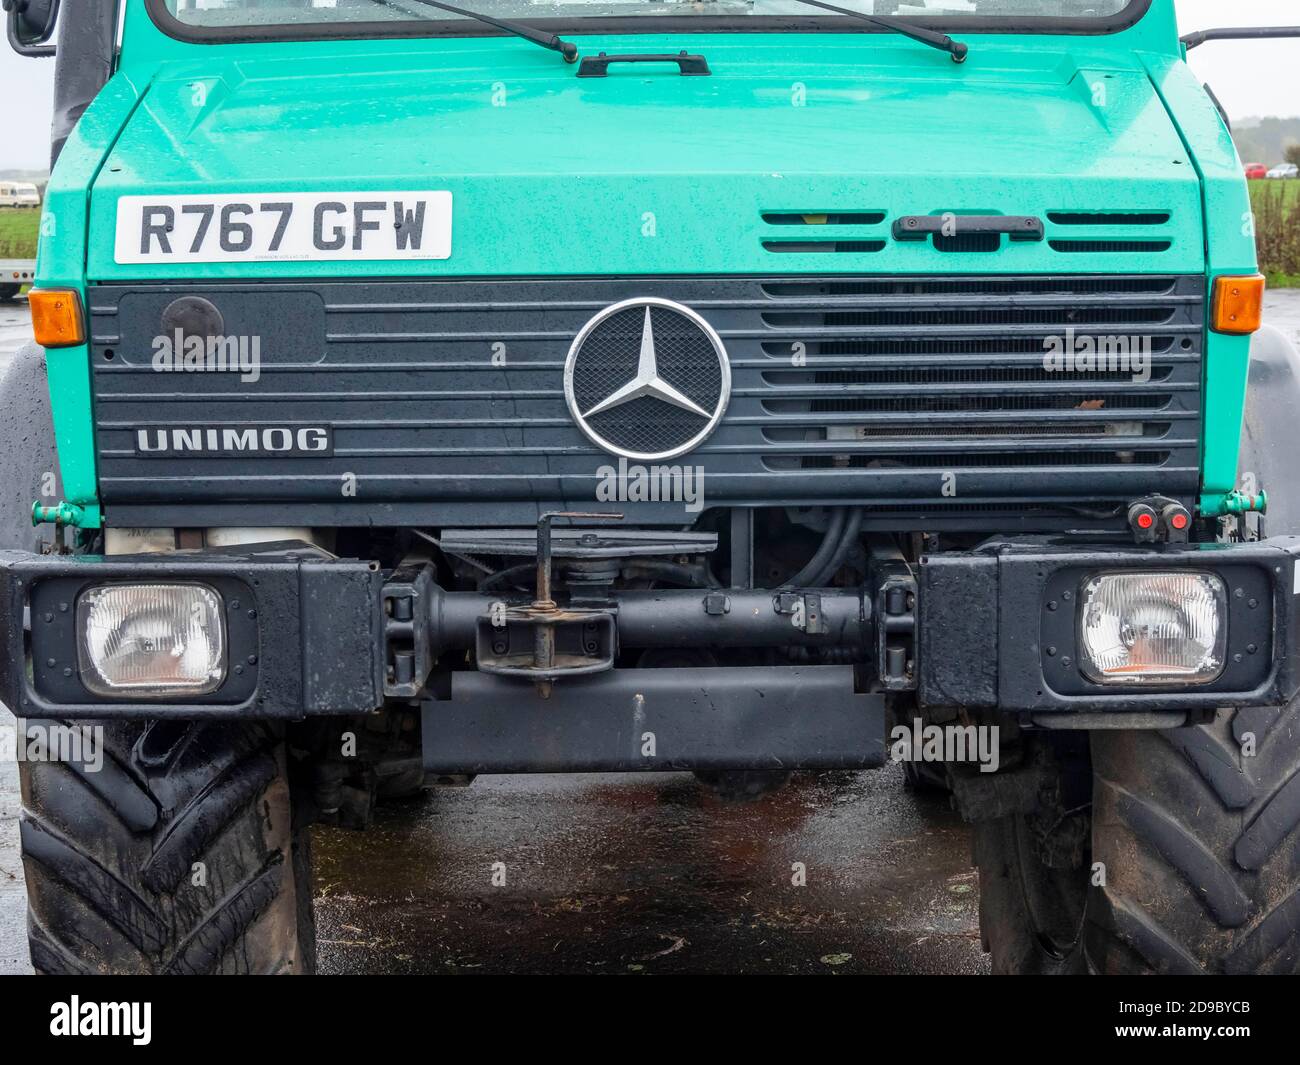 Front view of a Mercedes Unimog 4 wheel drive truck at an agricultural vehicle rally near Alnwick, Northumberland, UK Stock Photo